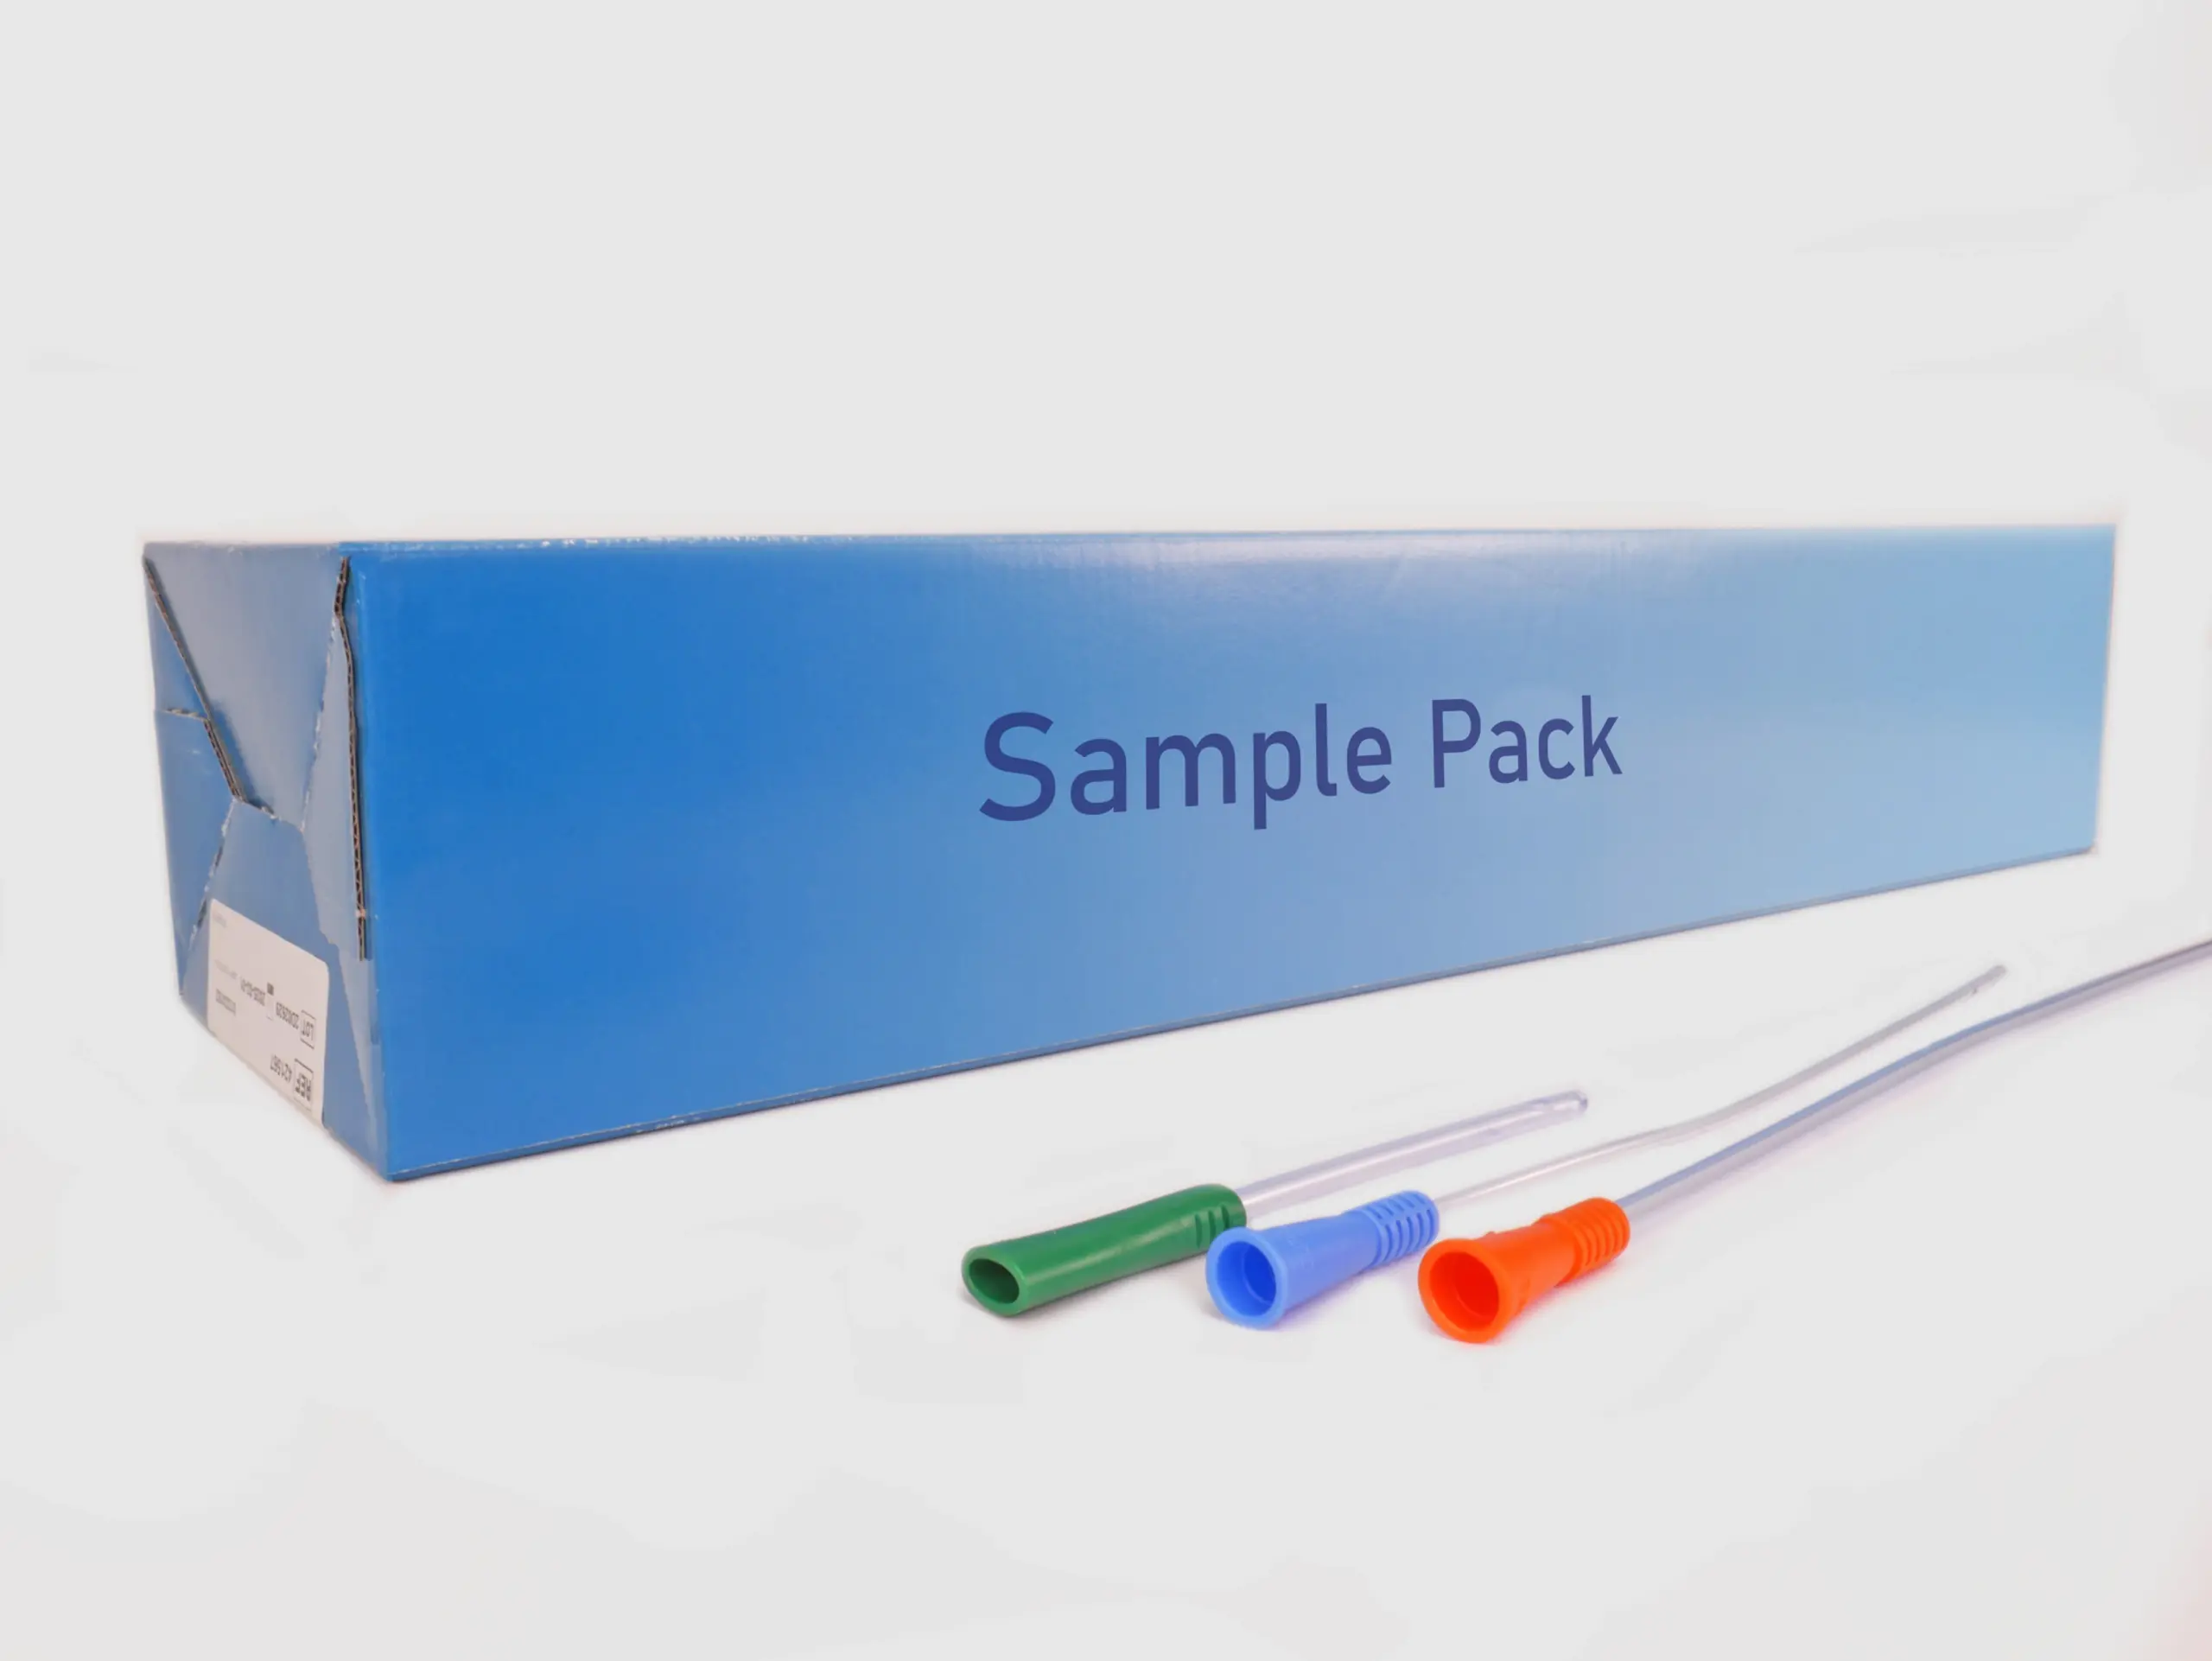 Photograph of a box for the "3-Day Free Sample Pack" of catheters from RA Fischer Co. Box is light blue and reads "Sample Pack." In front of the box are three catheters of differing lengths. The colors of the grippers are green, blue, and orange